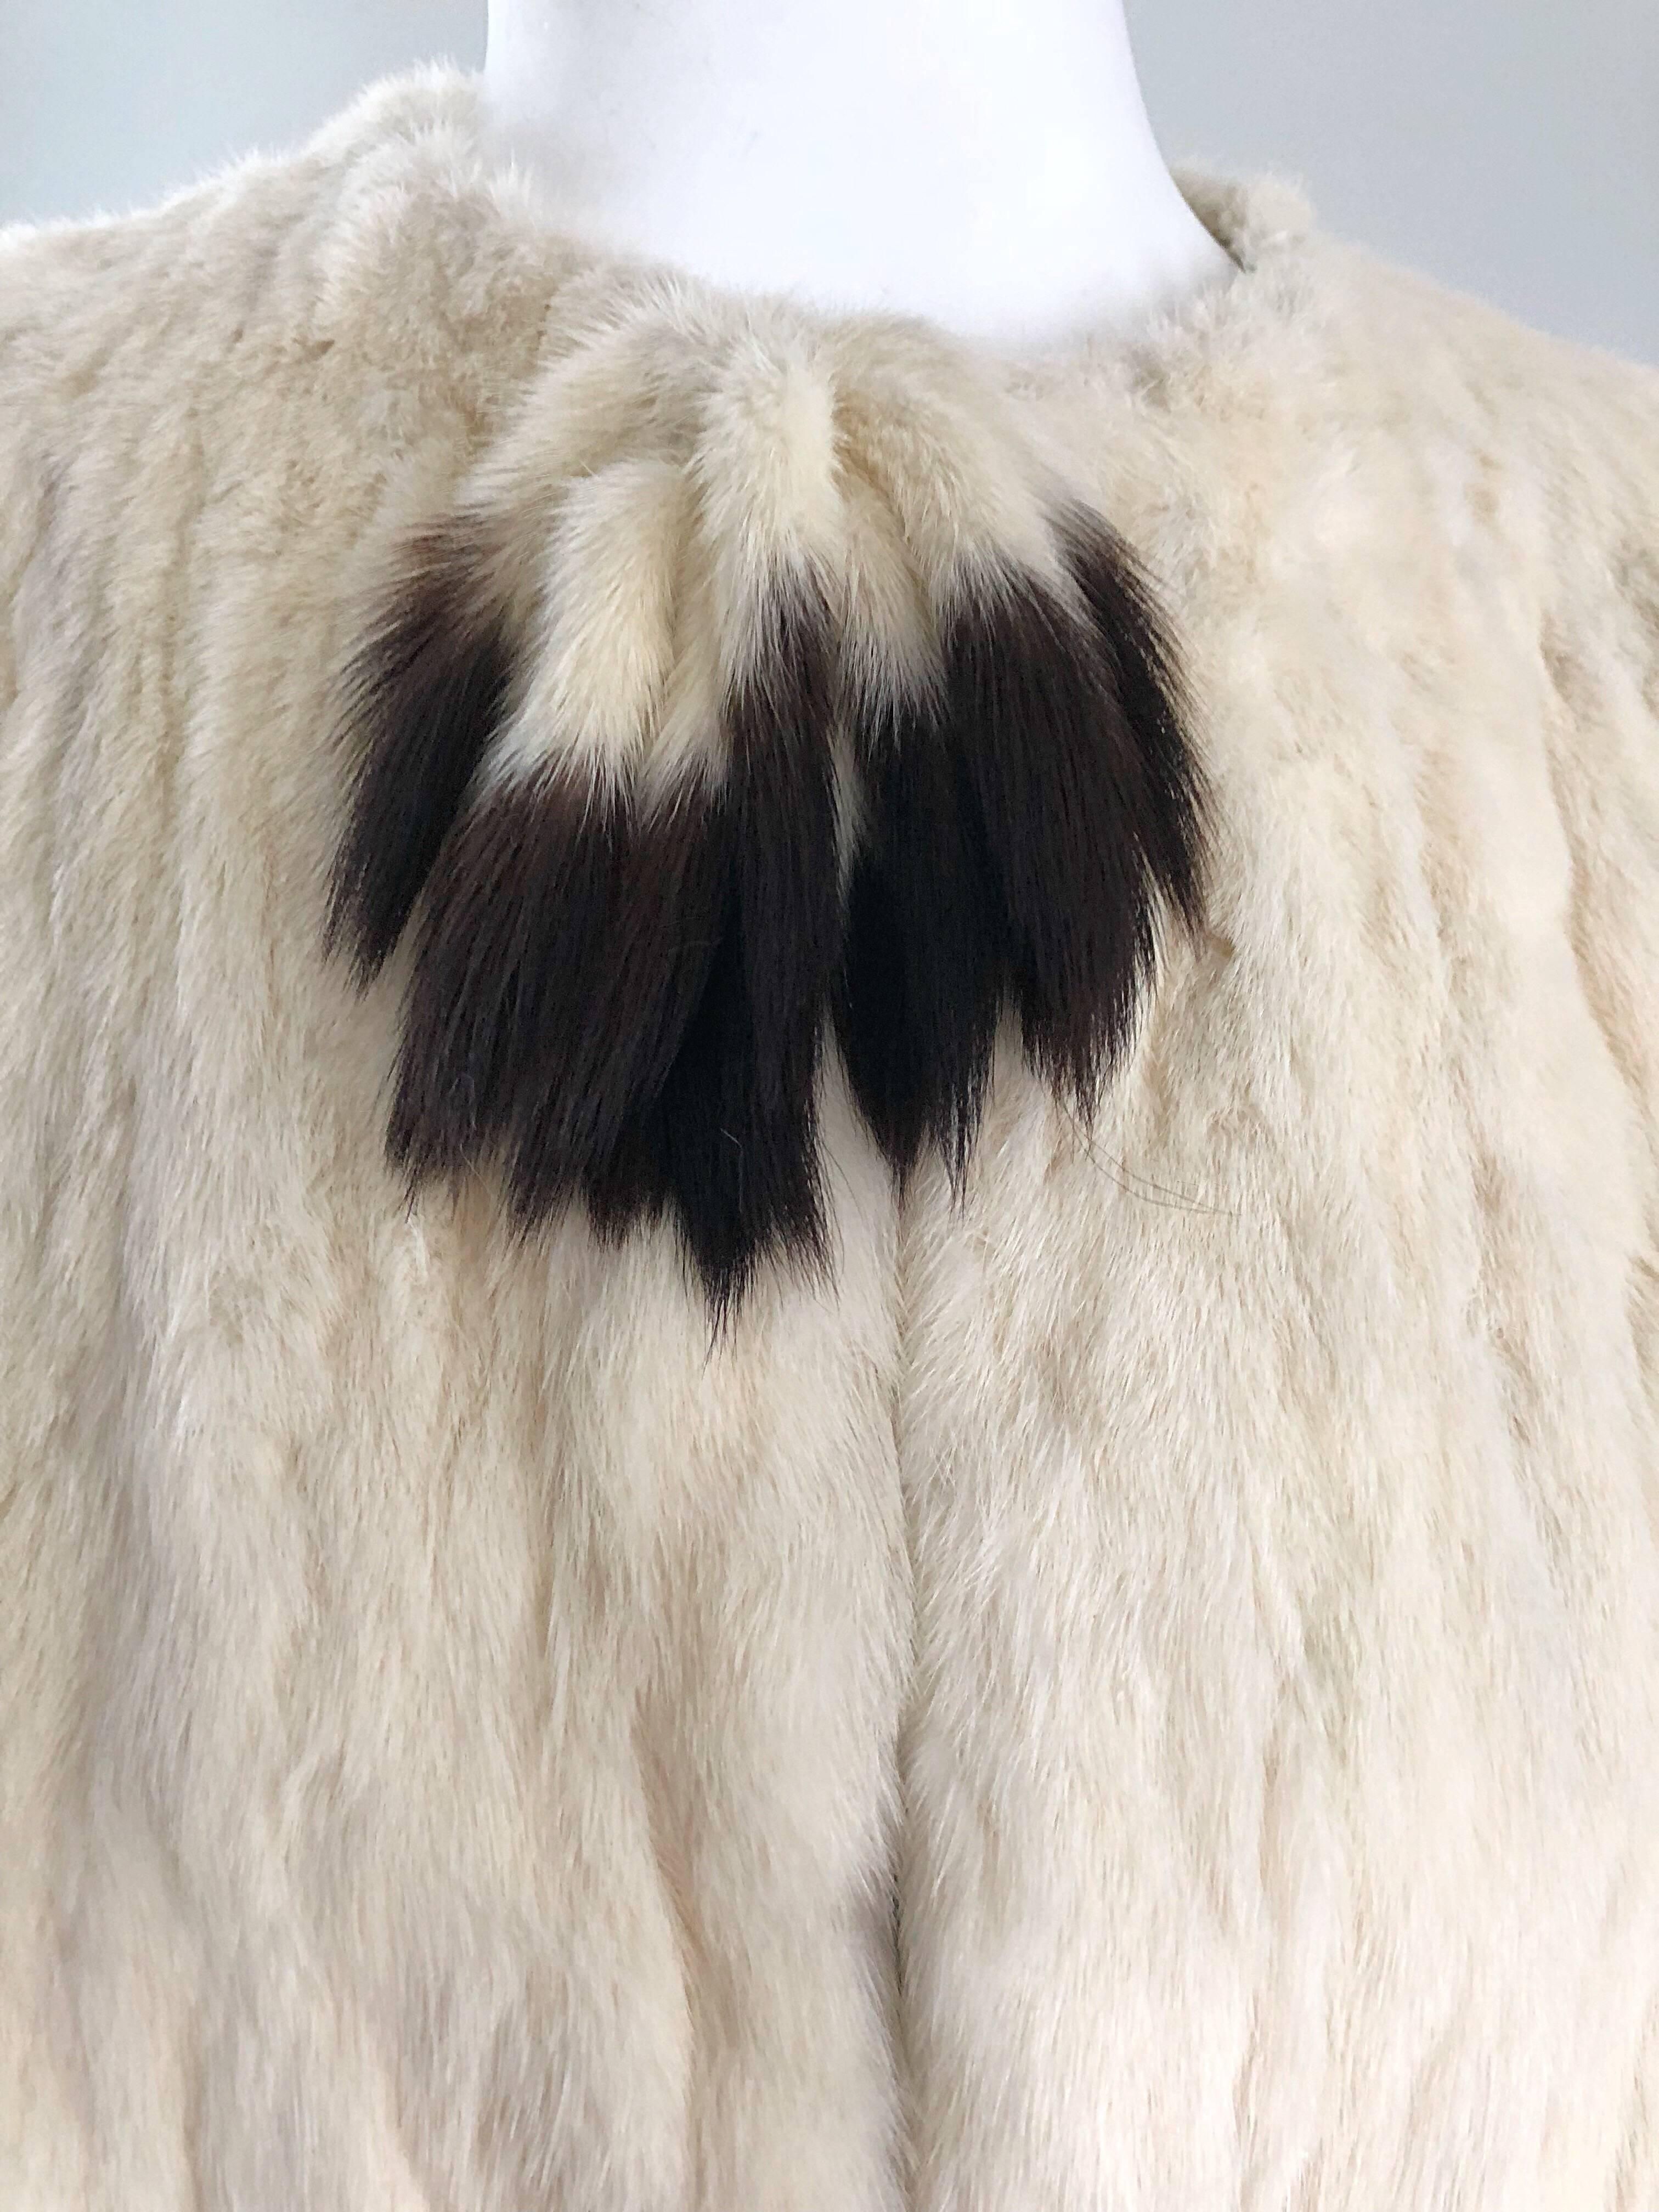 Luxurious late 30s Ermine fur soft jacket coat! Ermine is one of the softest furs out there, and was known to be worn by kings and queens since the 15th century. Couture workm with fur hook-and-eye closure up the top front. Extremely warm, and cozy,